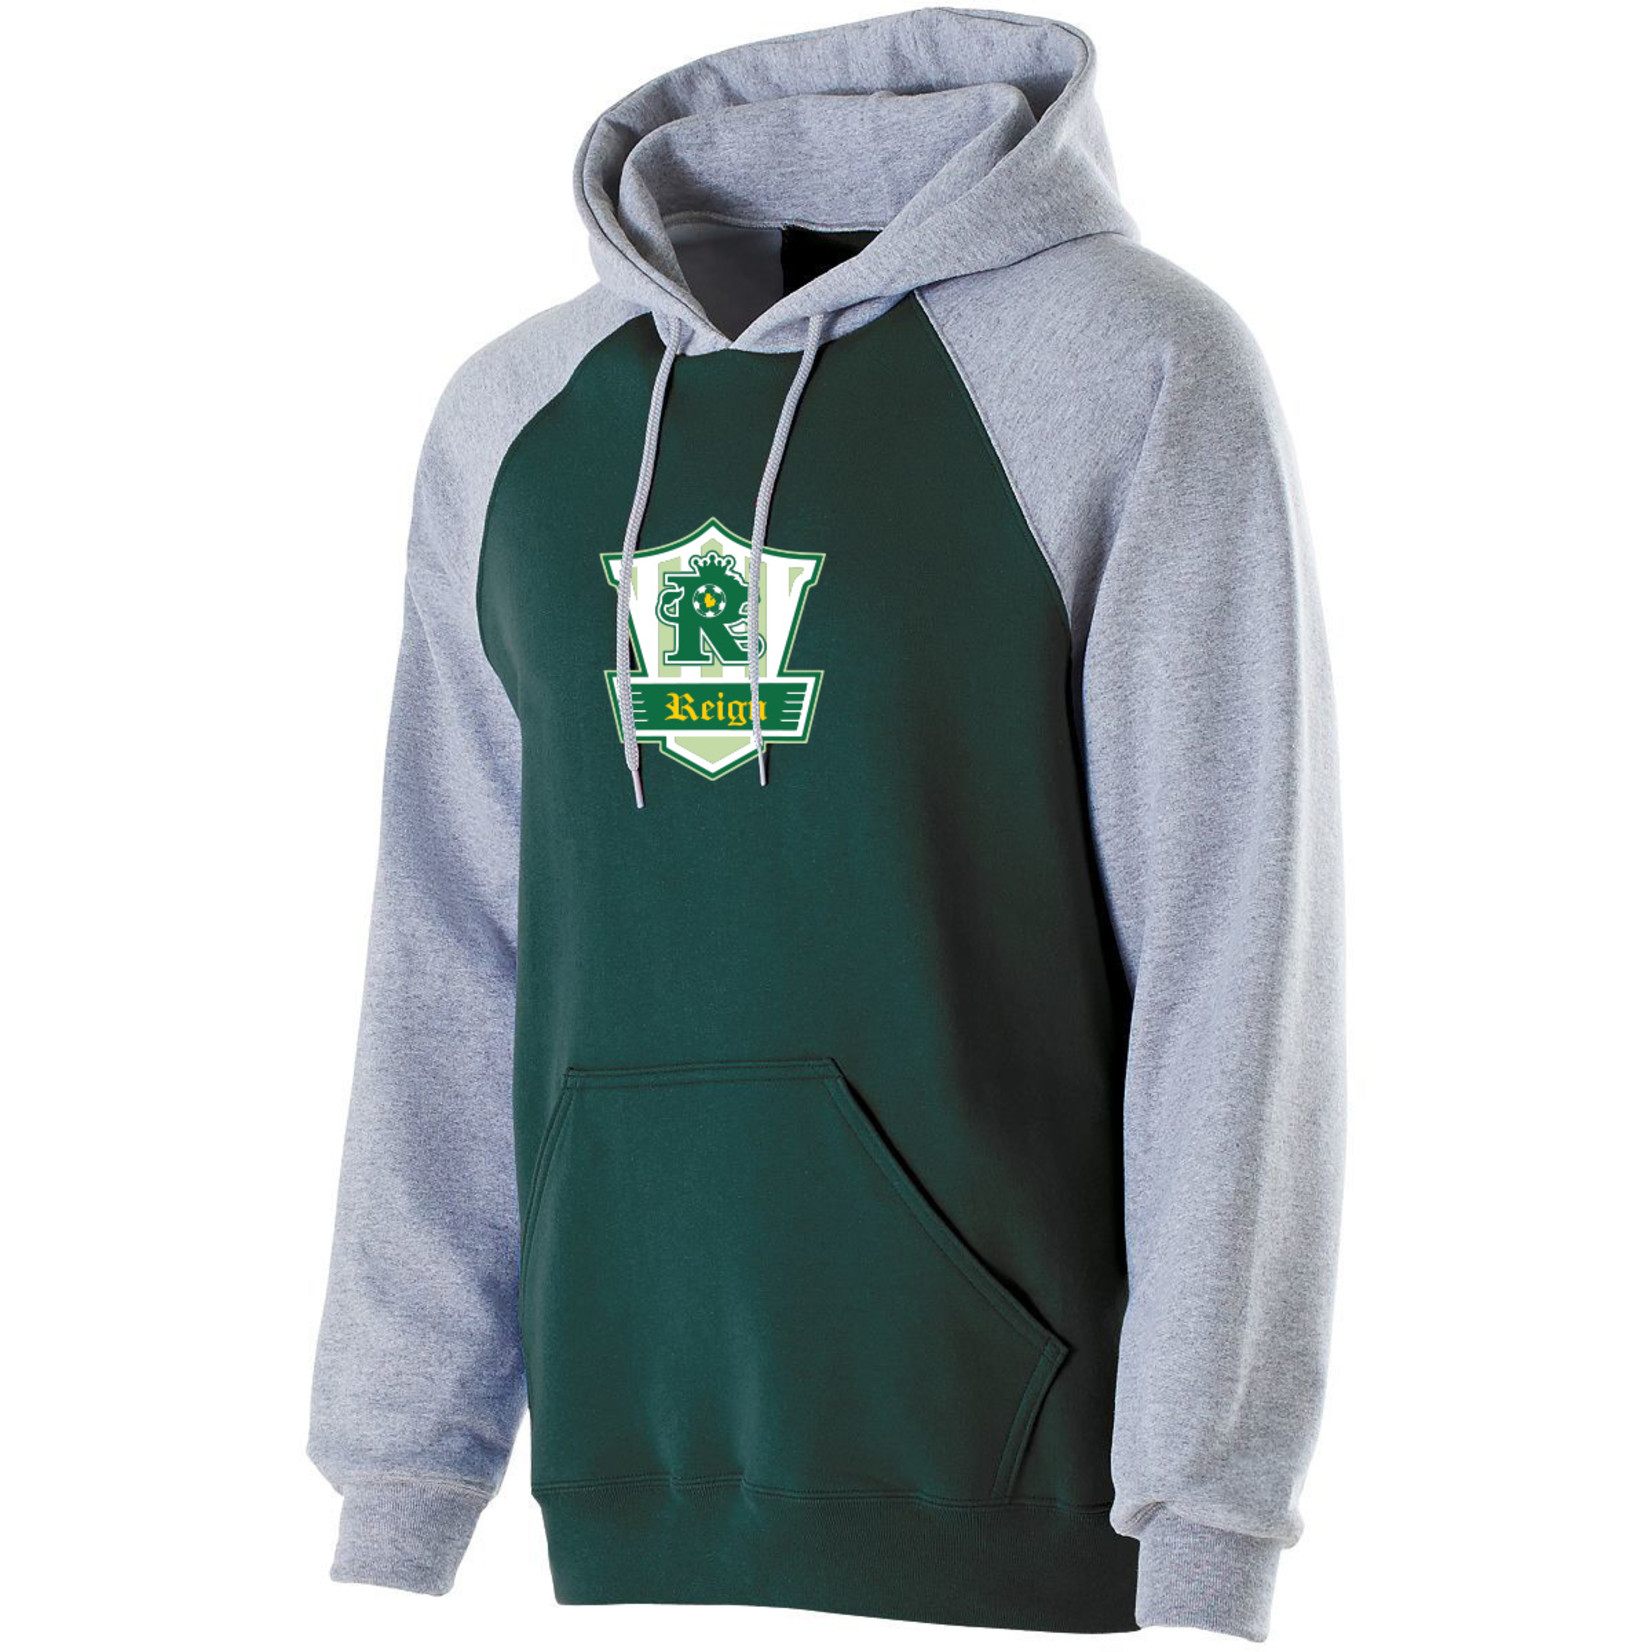 PLYMOUTH REIGN BANNER HOODIE (GREEN/GRAY)